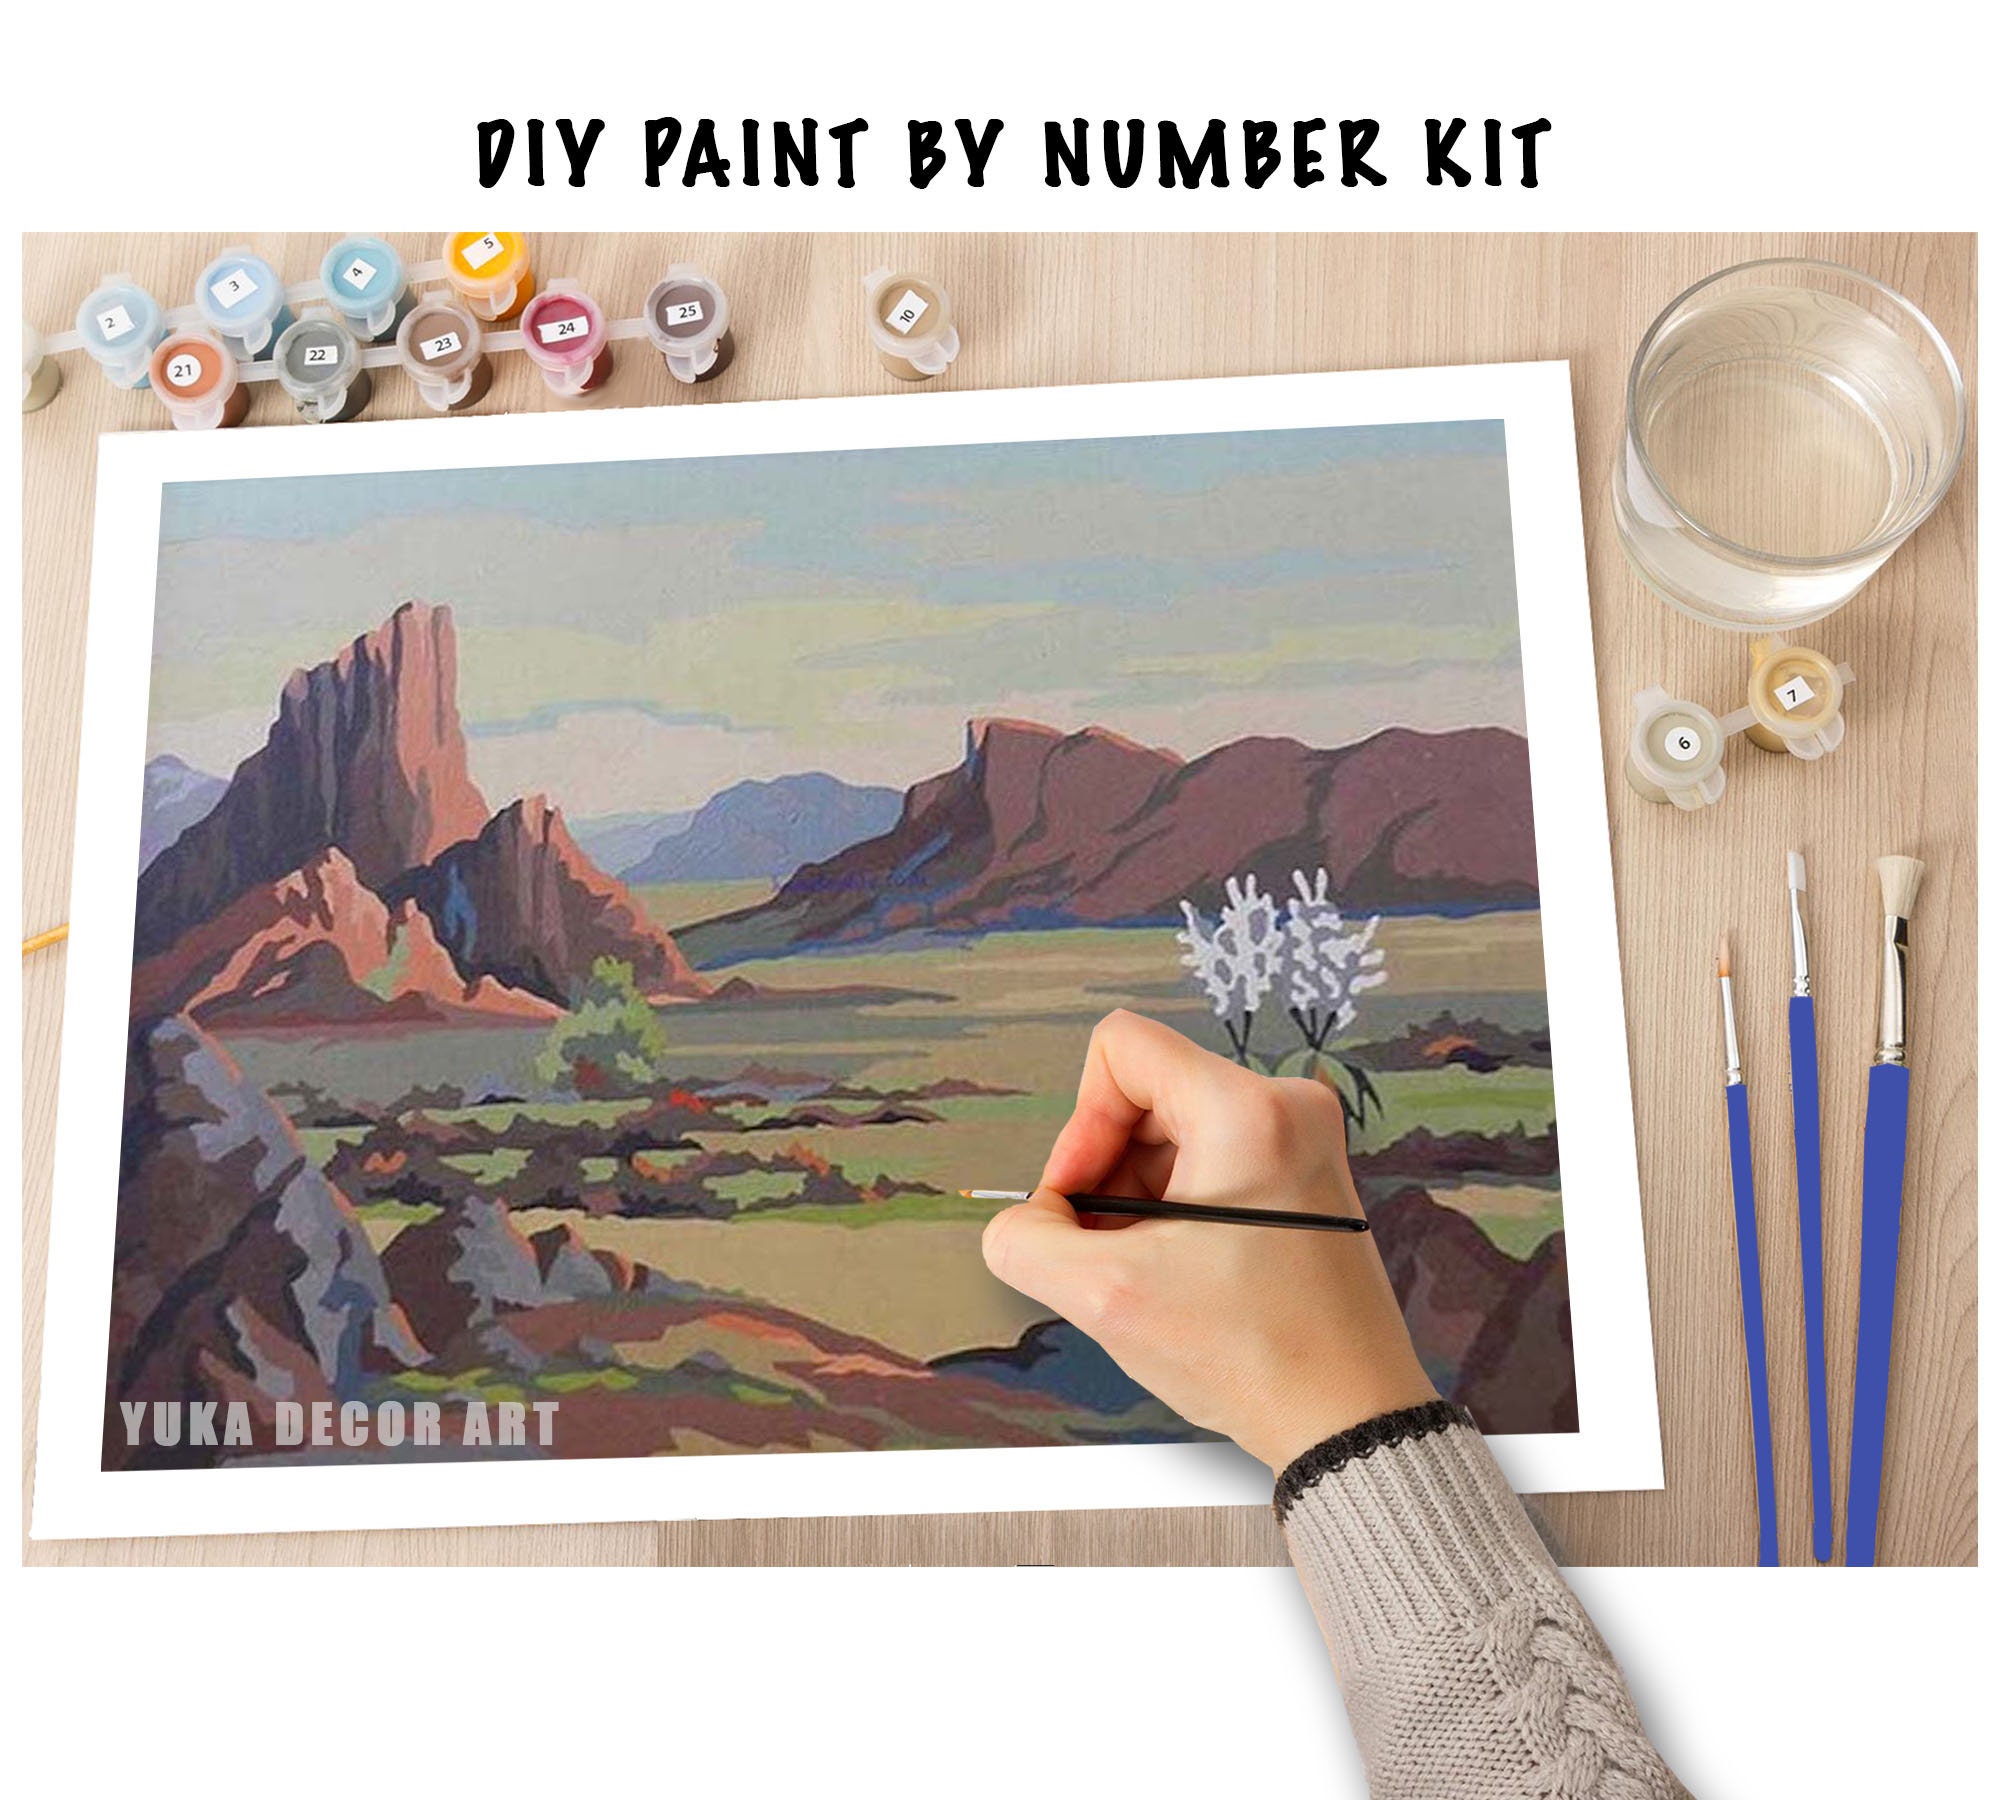 TIDYTIDE 2 DIY Paint by Number for Adults Framed Canvas, Painting by Number Kits for Adults Beginner, Landscape Paint by Numbers for Kids Framed